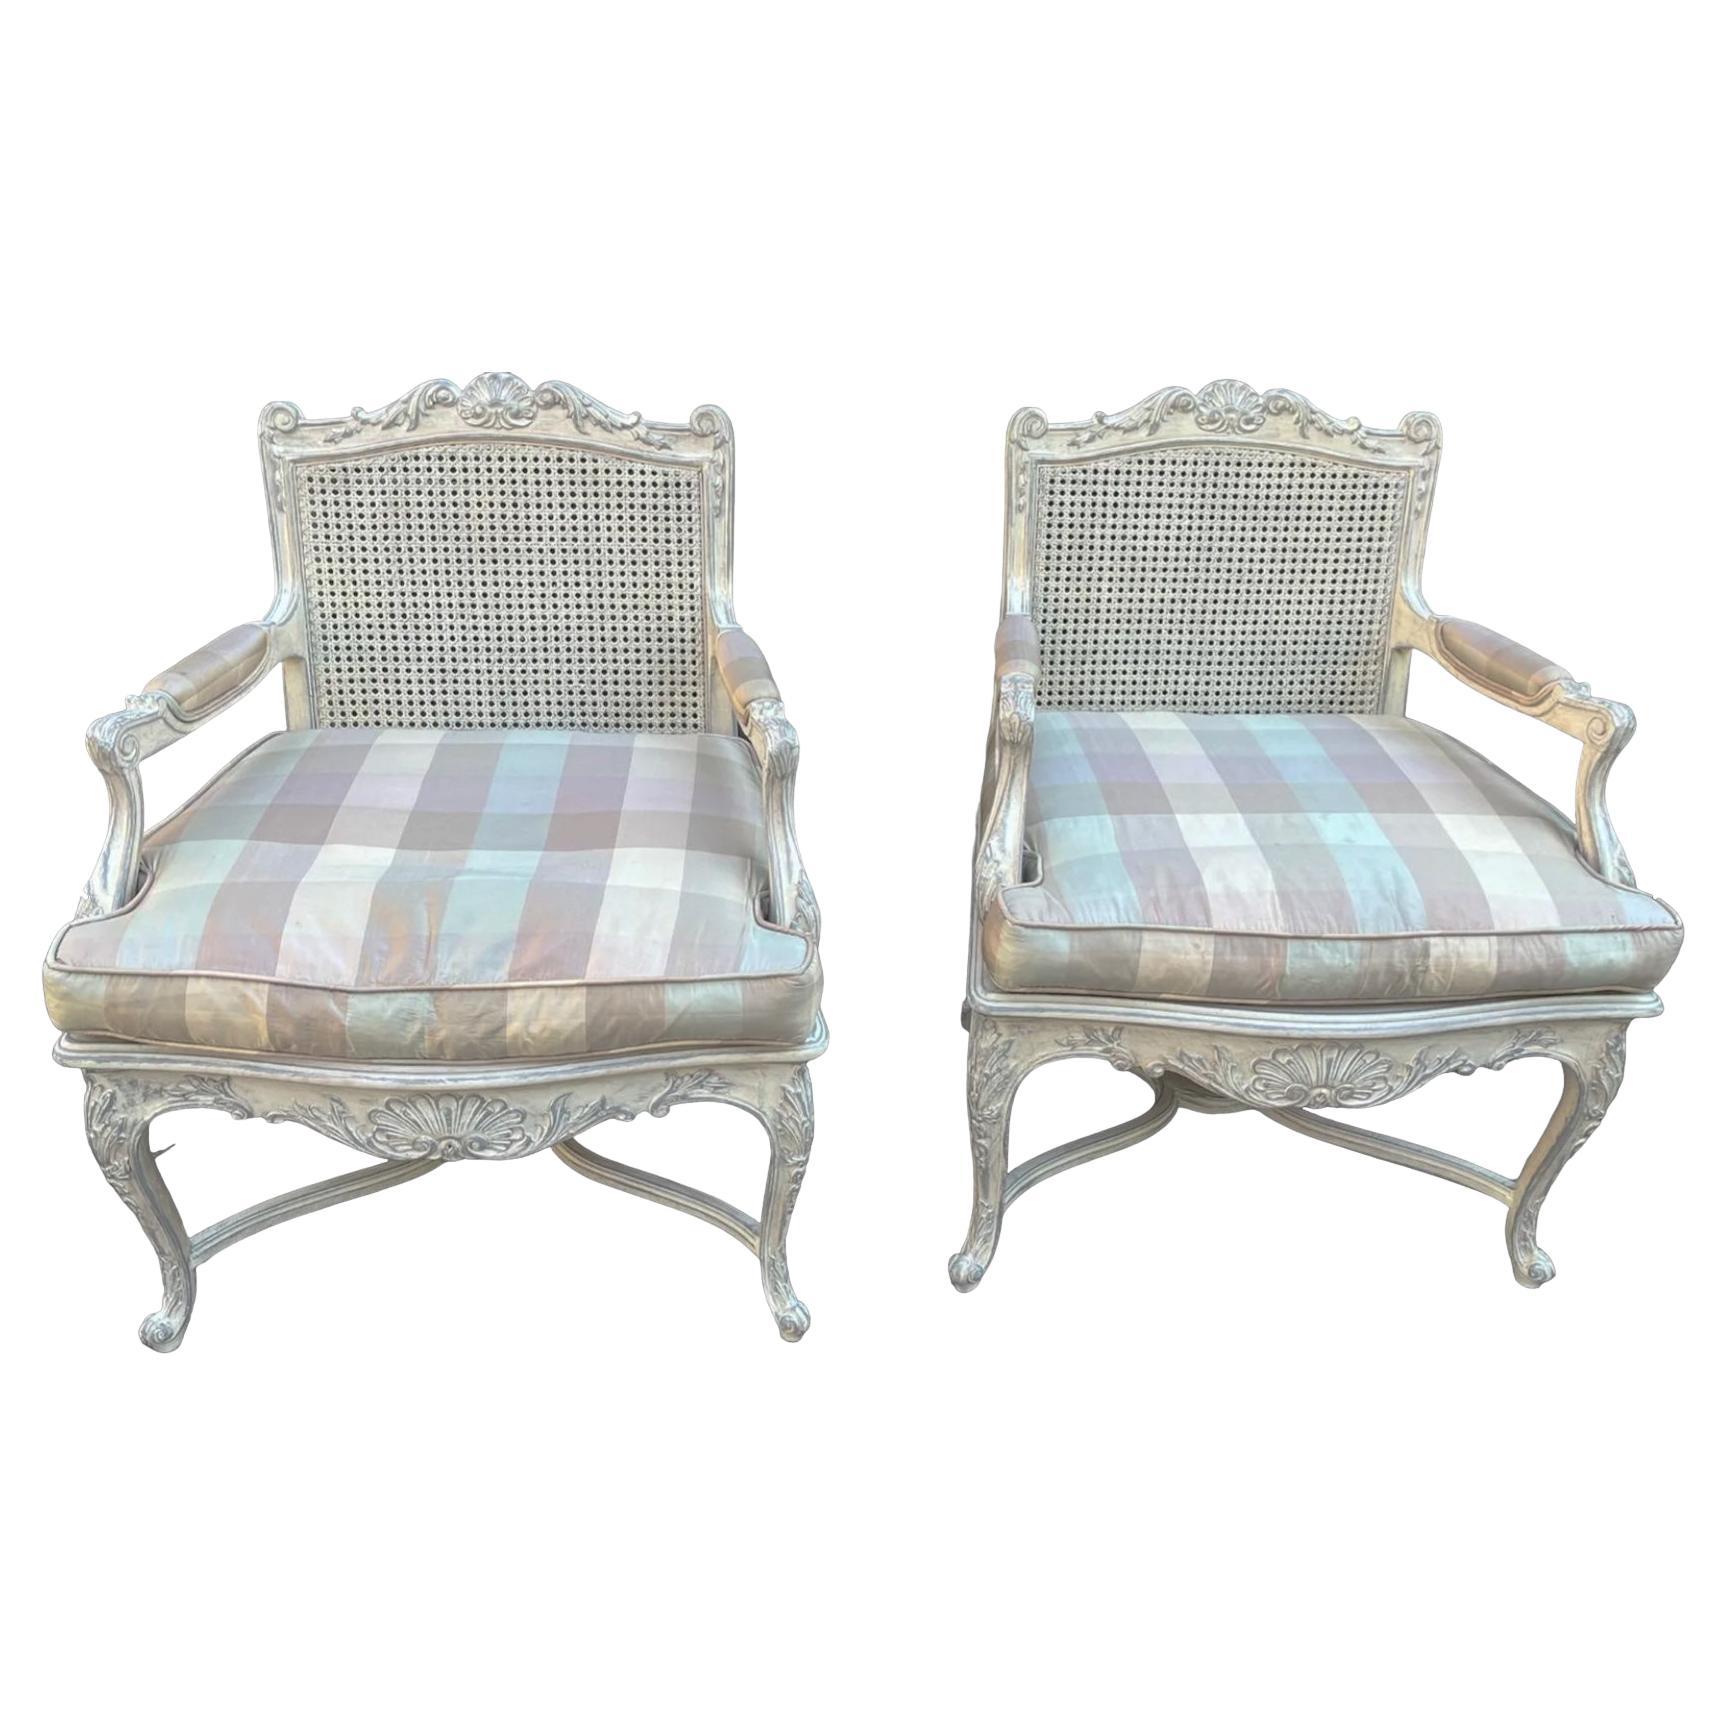 French Louis XV Style Carved Shell & Painted Caned Bergere Chairs -Pair In Good Condition For Sale In Kennesaw, GA